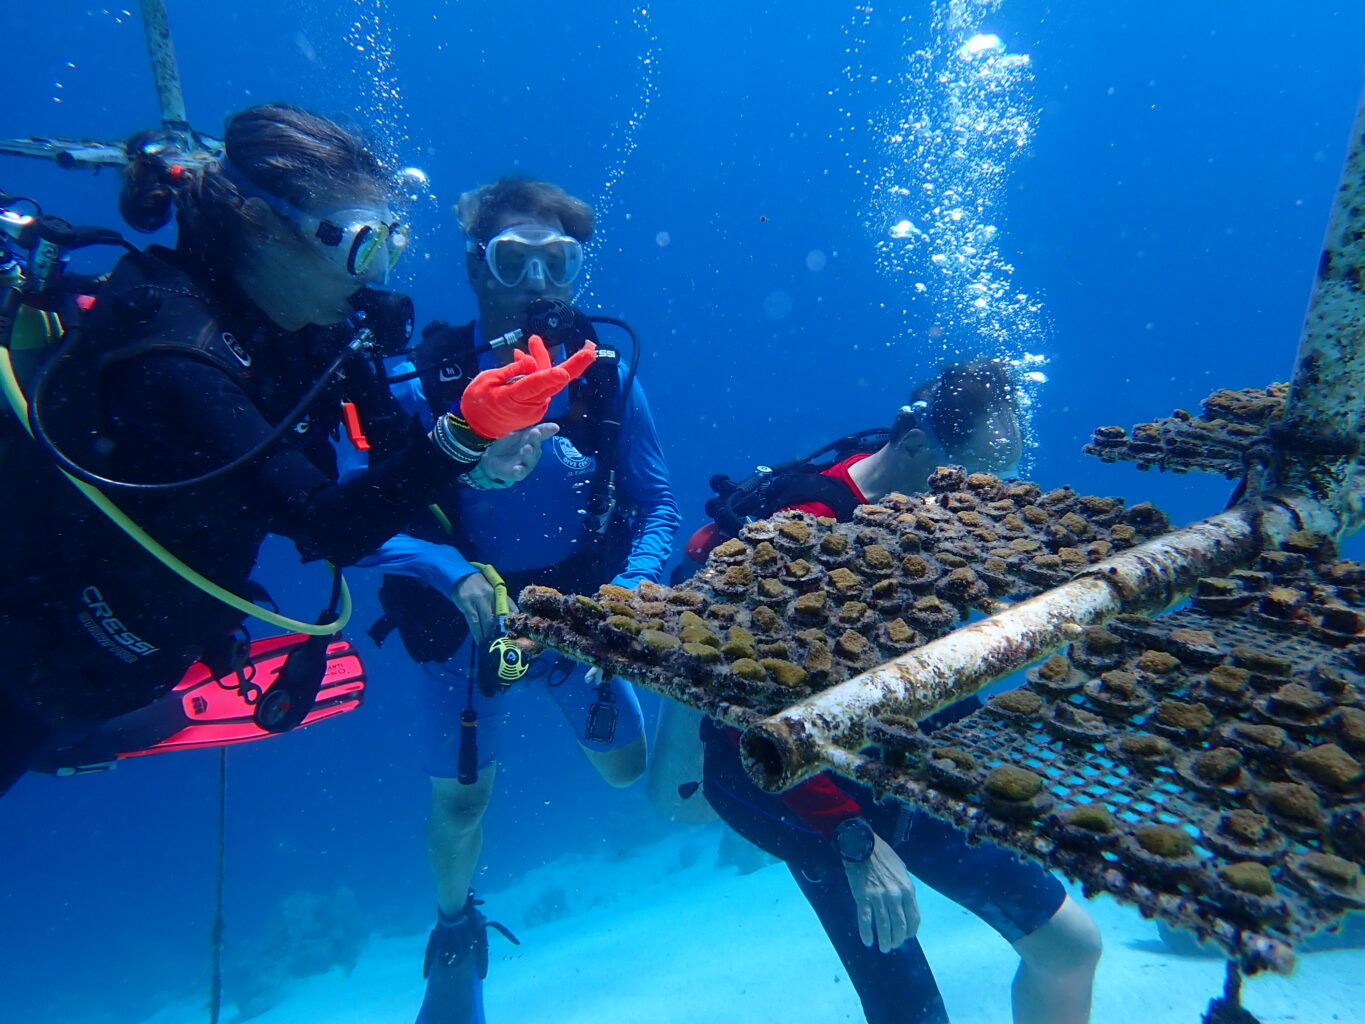 Three people in scuba gear look at a coral propagation structure underwater